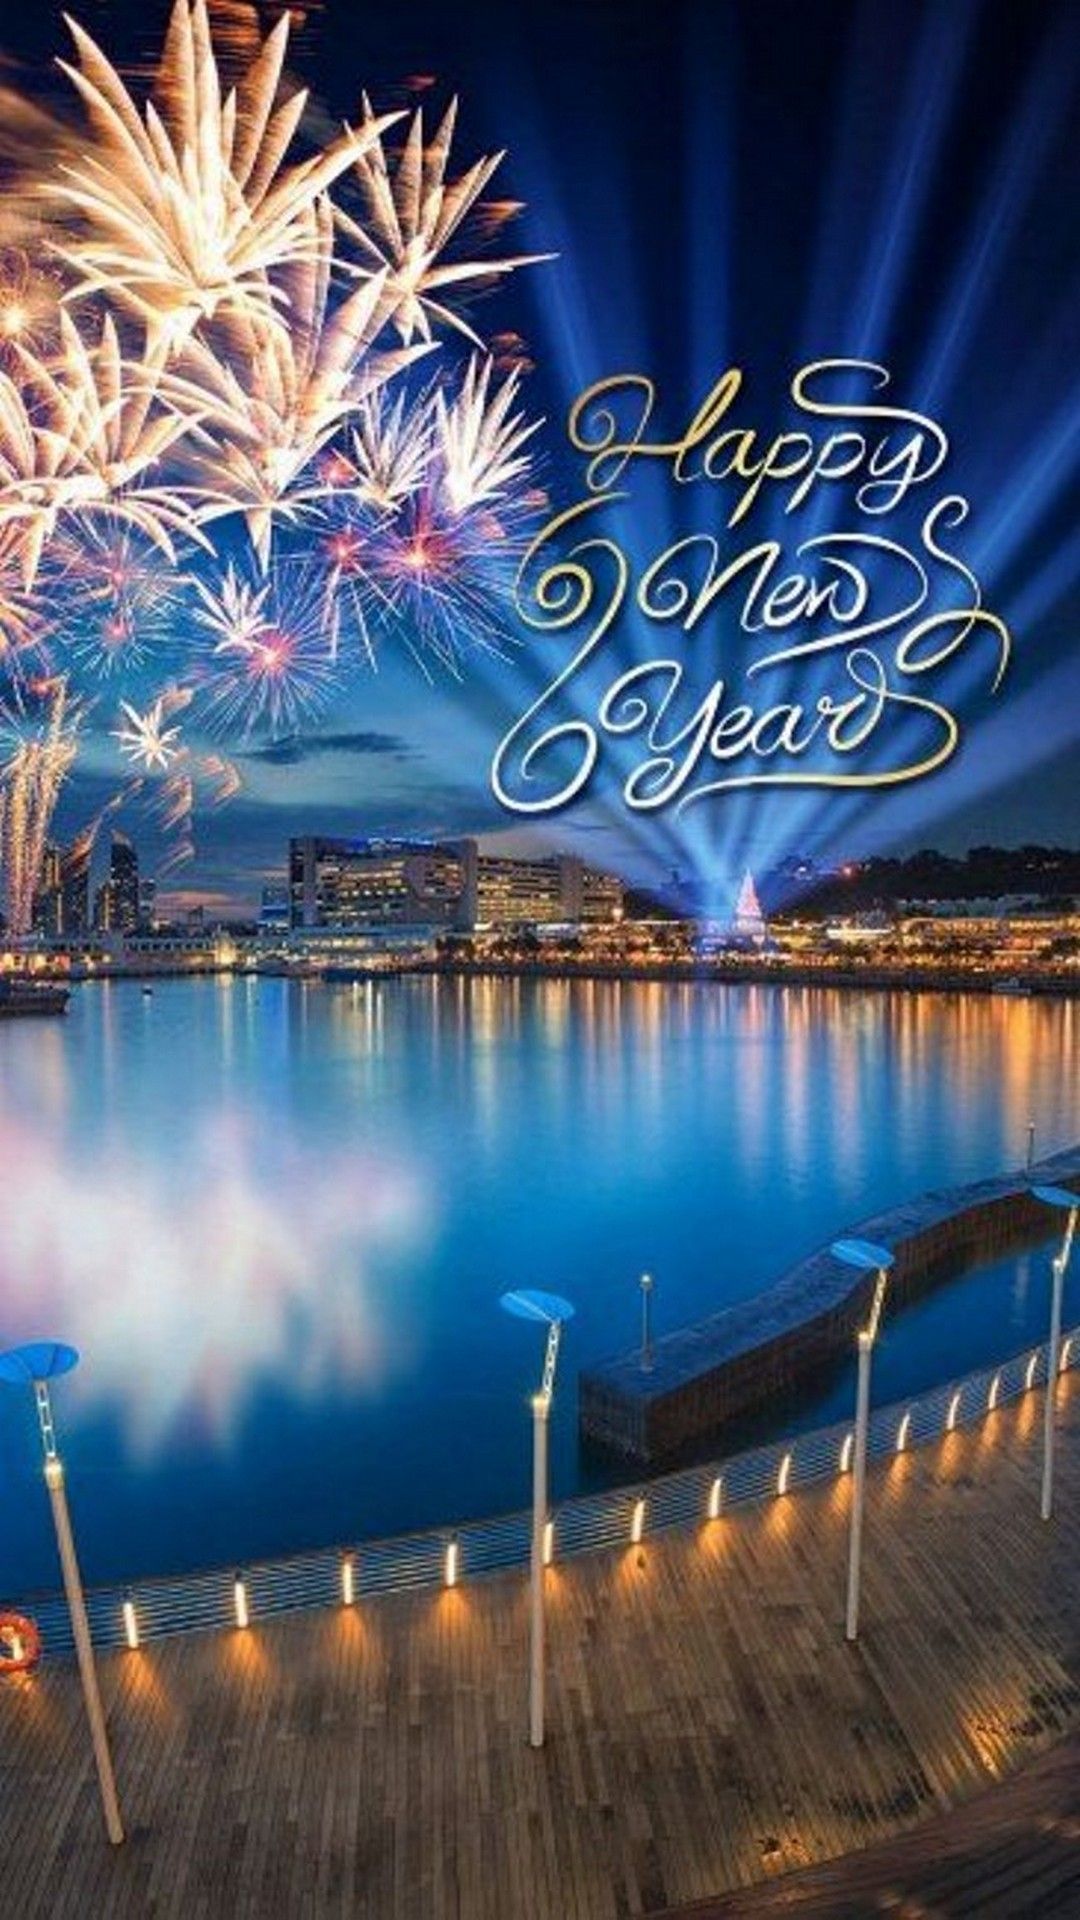 iPhone Wallpaper  Happy New Year tjn  New years eve wallpaper Happy new  year wallpaper New year wallpaper